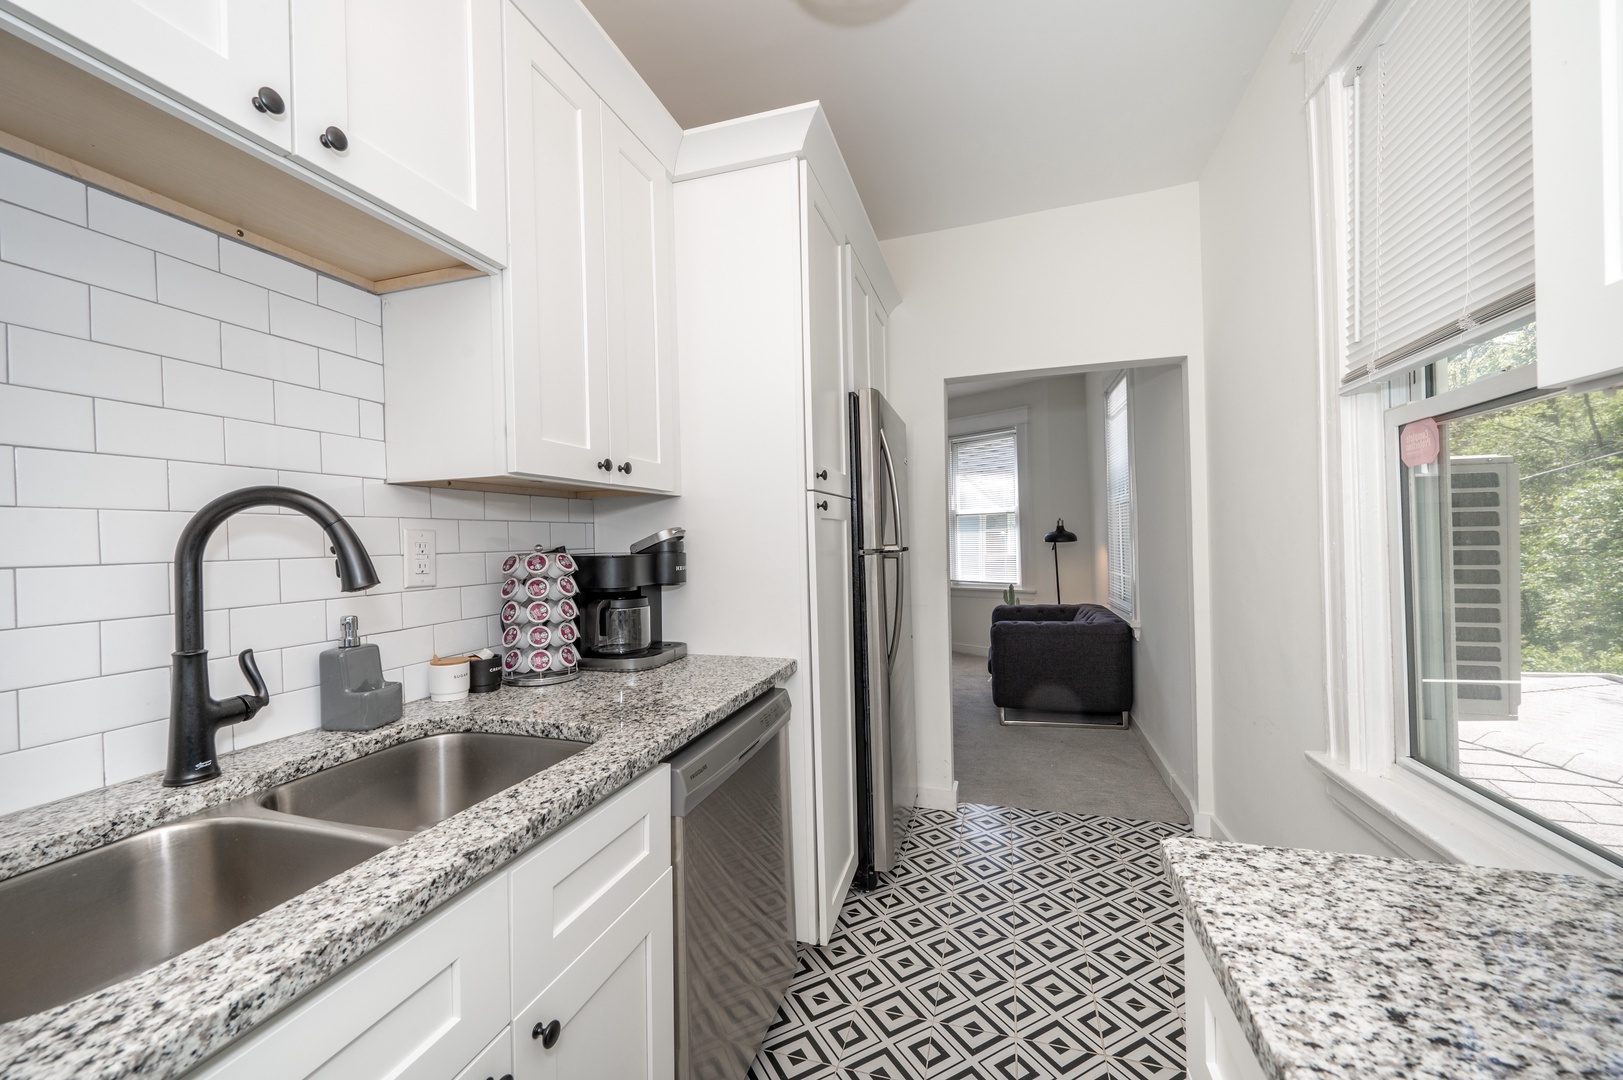 Apt 2 – The modern kitchen offers ample storage & all the comforts of home